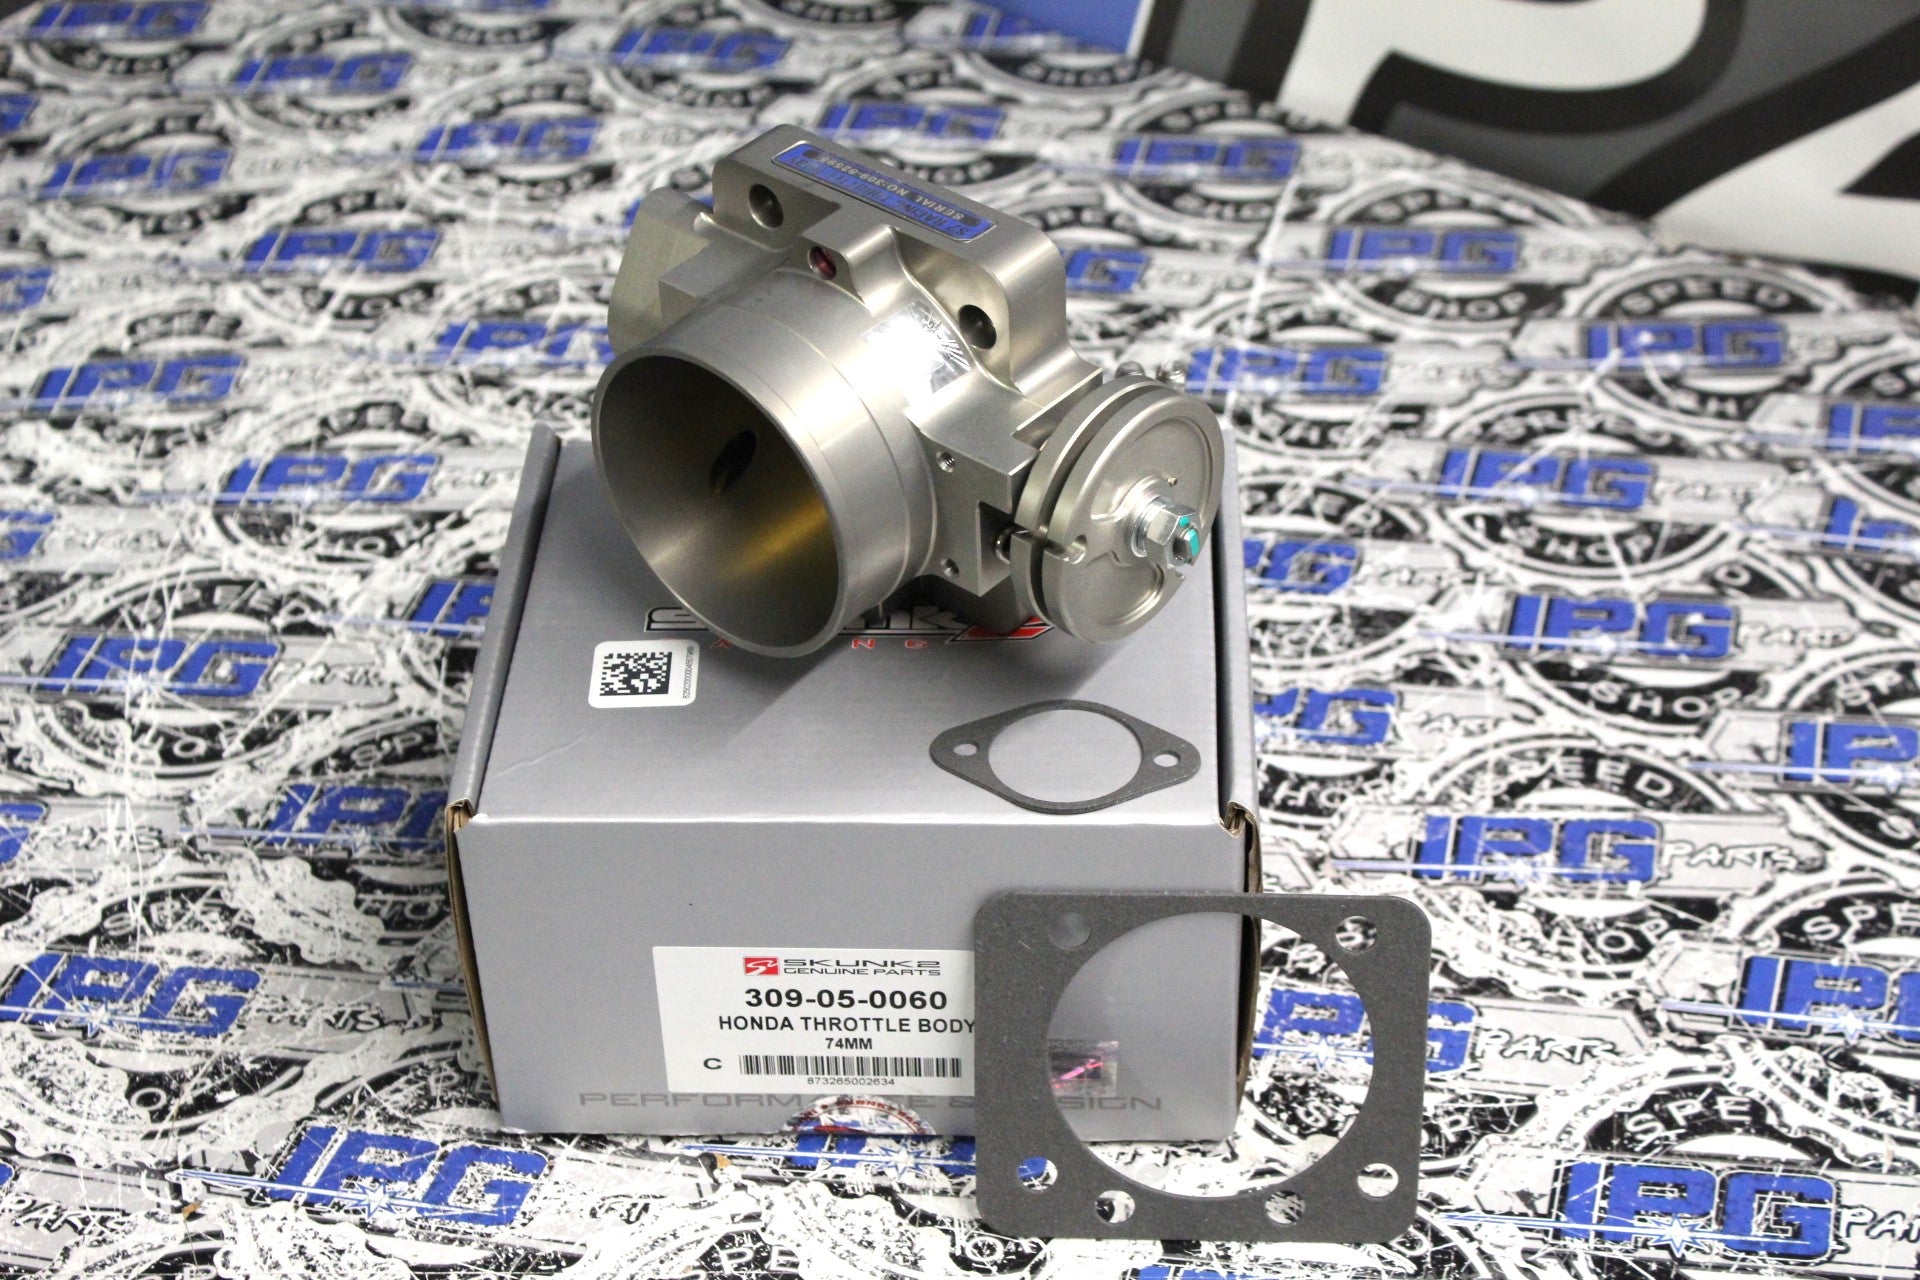 Skunk2 74mm Pro Series Throttle Body For Honda B16 B18 B20 D16 H22 and F20C Engines